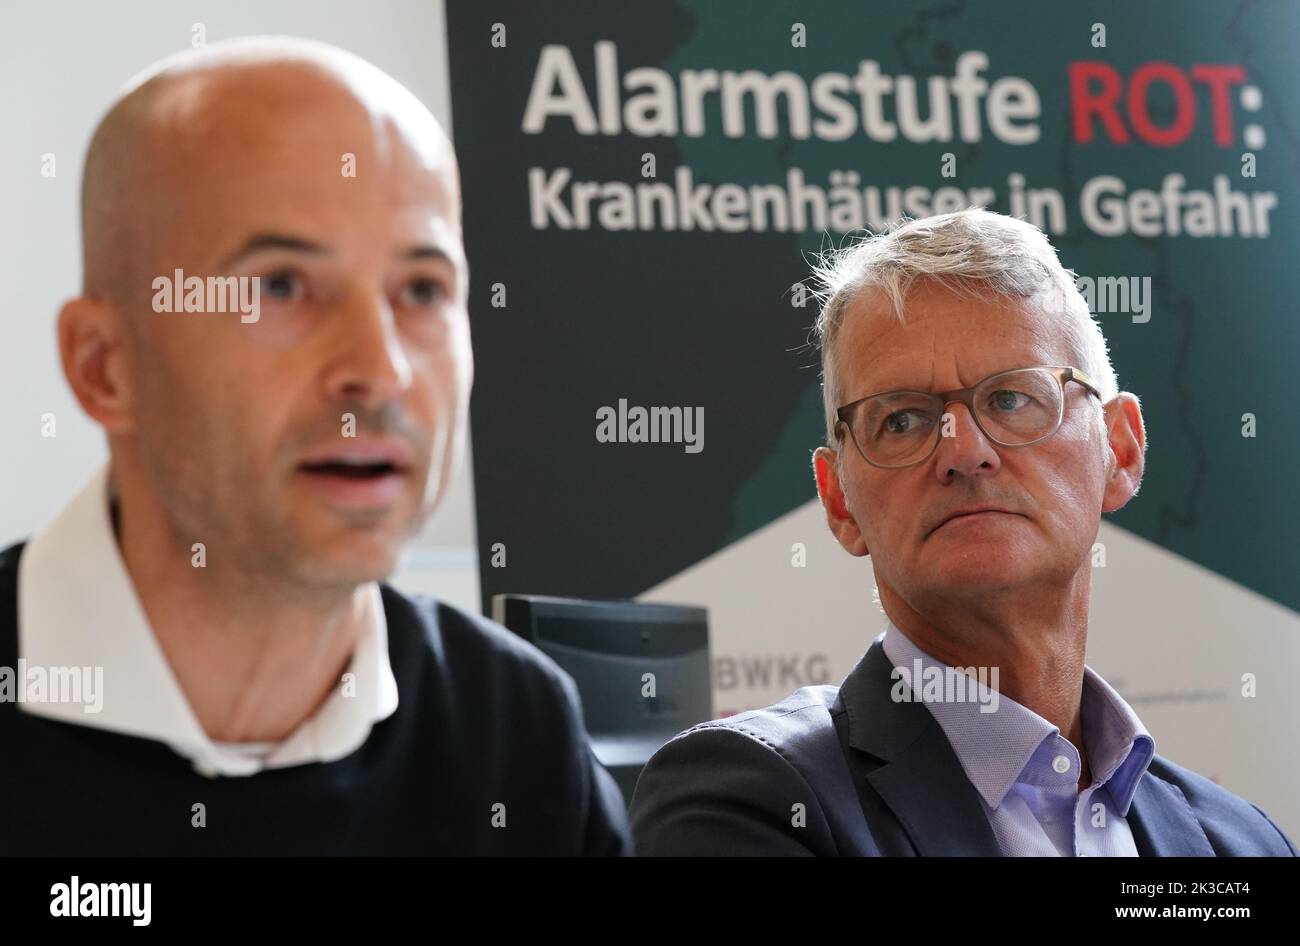 Hamburg, Germany. 26th Sep, 2022. Gerald Gaß (r), Chairman of the Board of the German Hospital Federation (DKG), and Joachim Gemmel, Chairman of the Hamburg Hospital Federation (HKG), sit in the Frankfurt School of Finance & Management at a press conference held by the Hamburg Hospital Federation on the economic situation of hospitals in Germany. Credit: Marcus Brandt/dpa/Alamy Live News Stock Photo